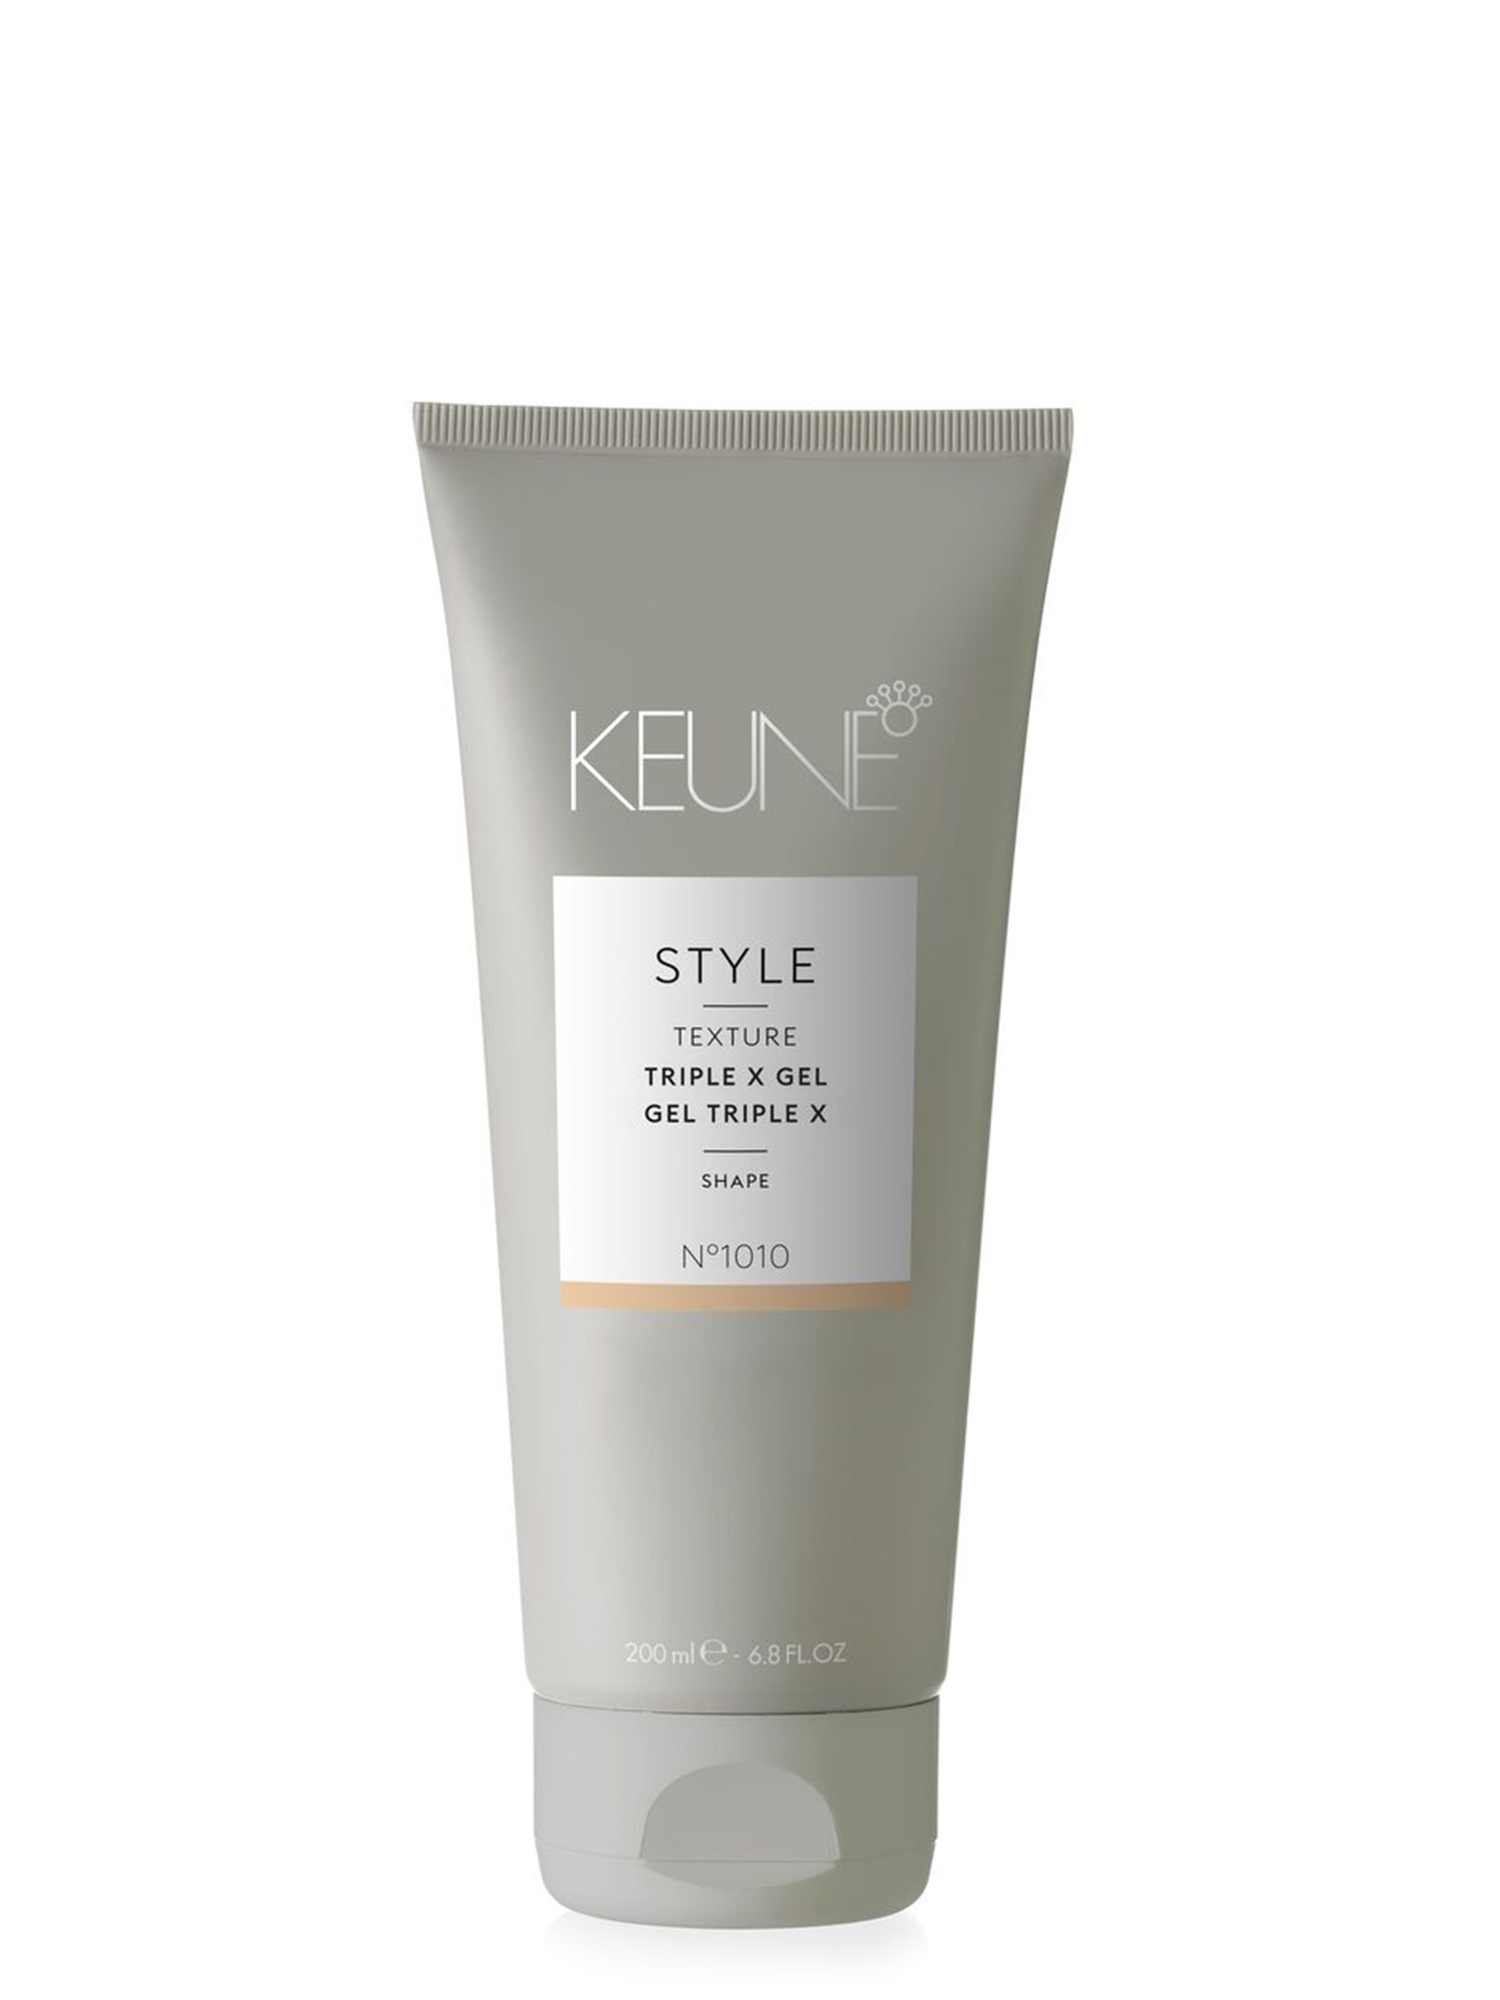 STYLE TRIPLE X GEL by Keune: This hair gel provides extreme hold and shape. Ideal for short hairstyles, with texture, definition, and radiant shine. Available now on keune.ch!